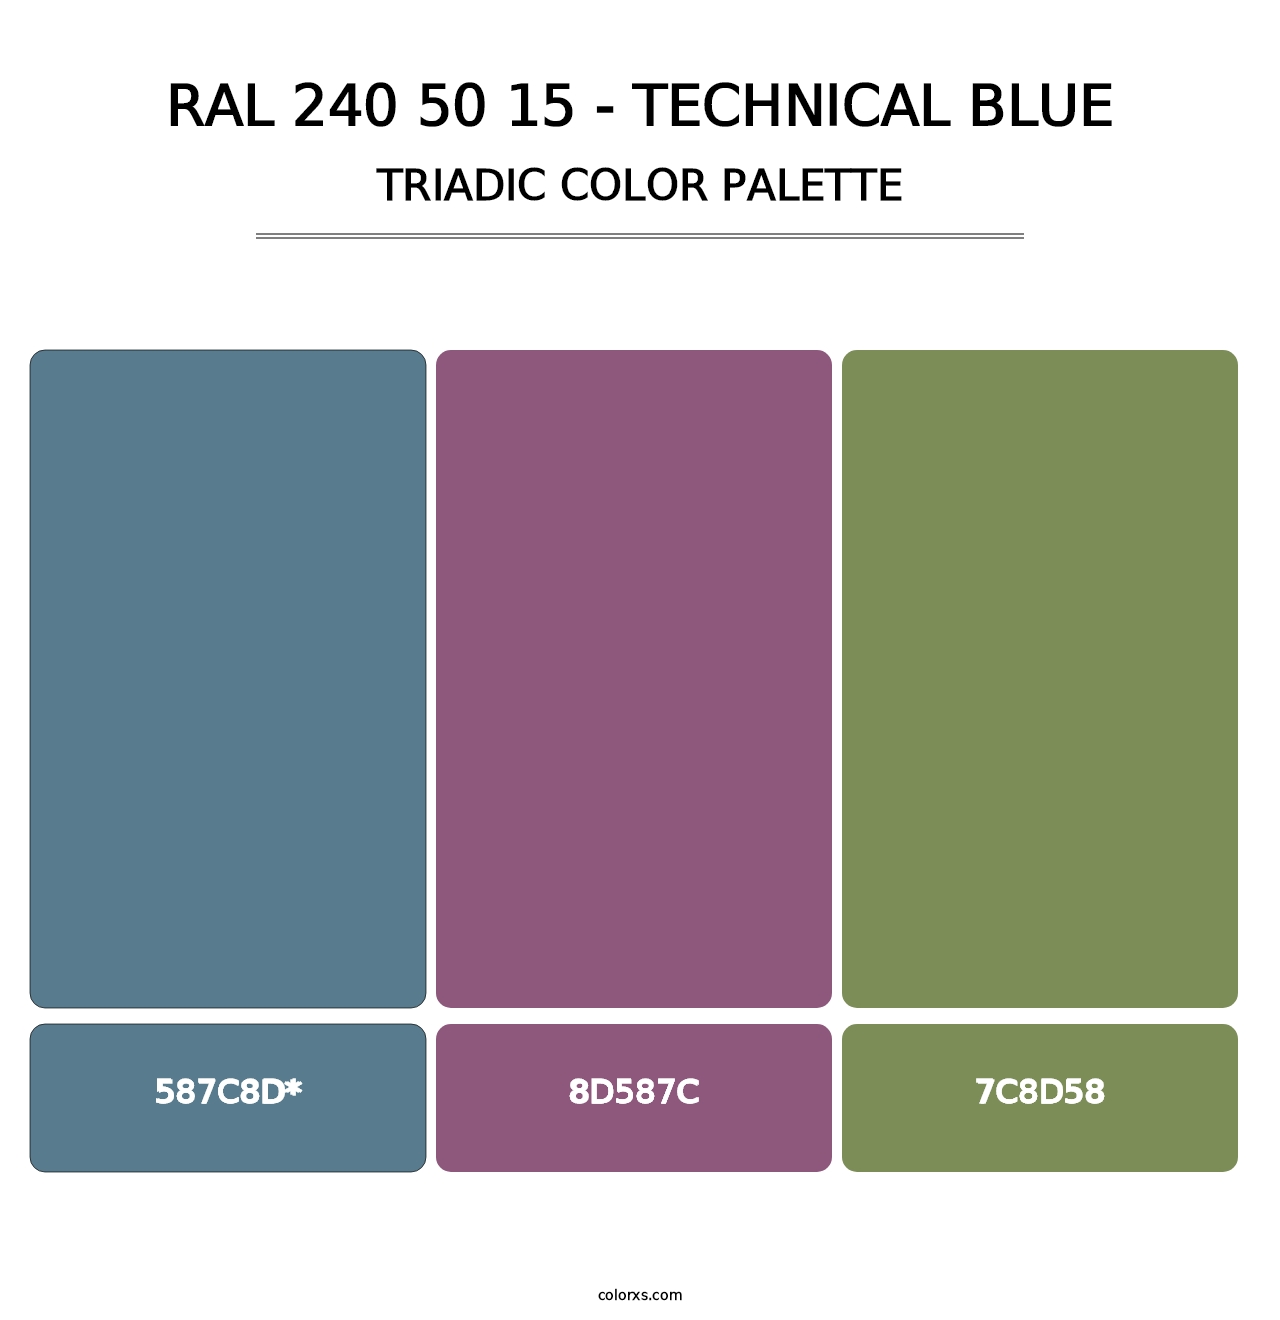 RAL 240 50 15 - Technical Blue - Triadic Color Palette